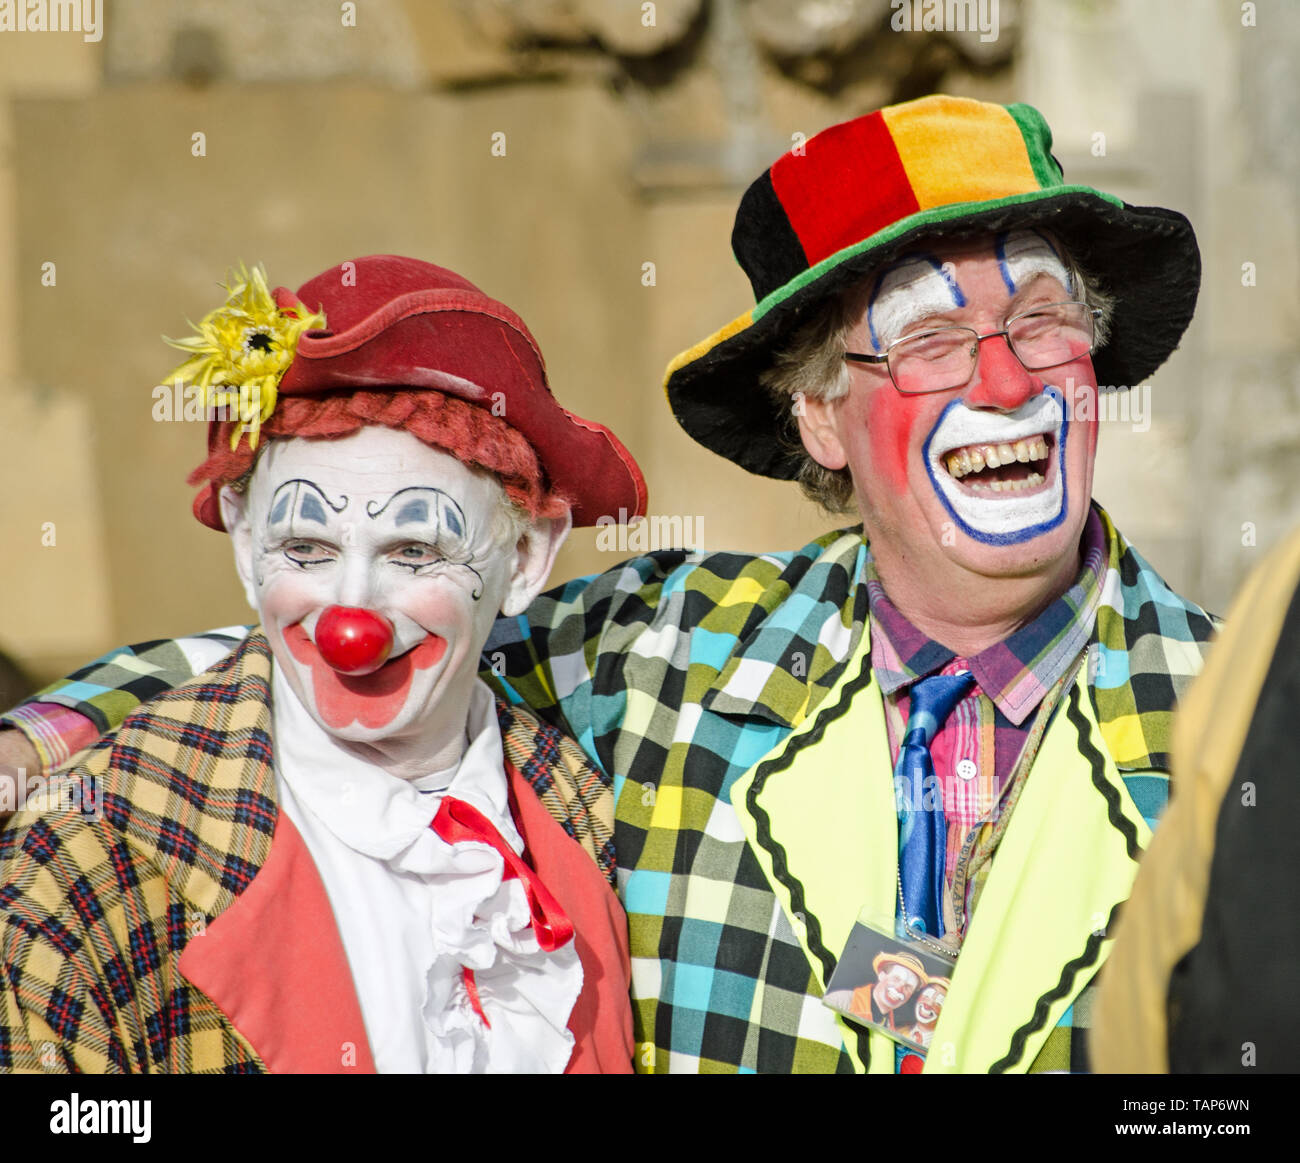 LONDON, UK - FEBRUARY 7, 2016:  Two clowns sharing a joke ahead of the annual church service in memory of Joseph Grimaldi held at All Saints Church in Stock Photo